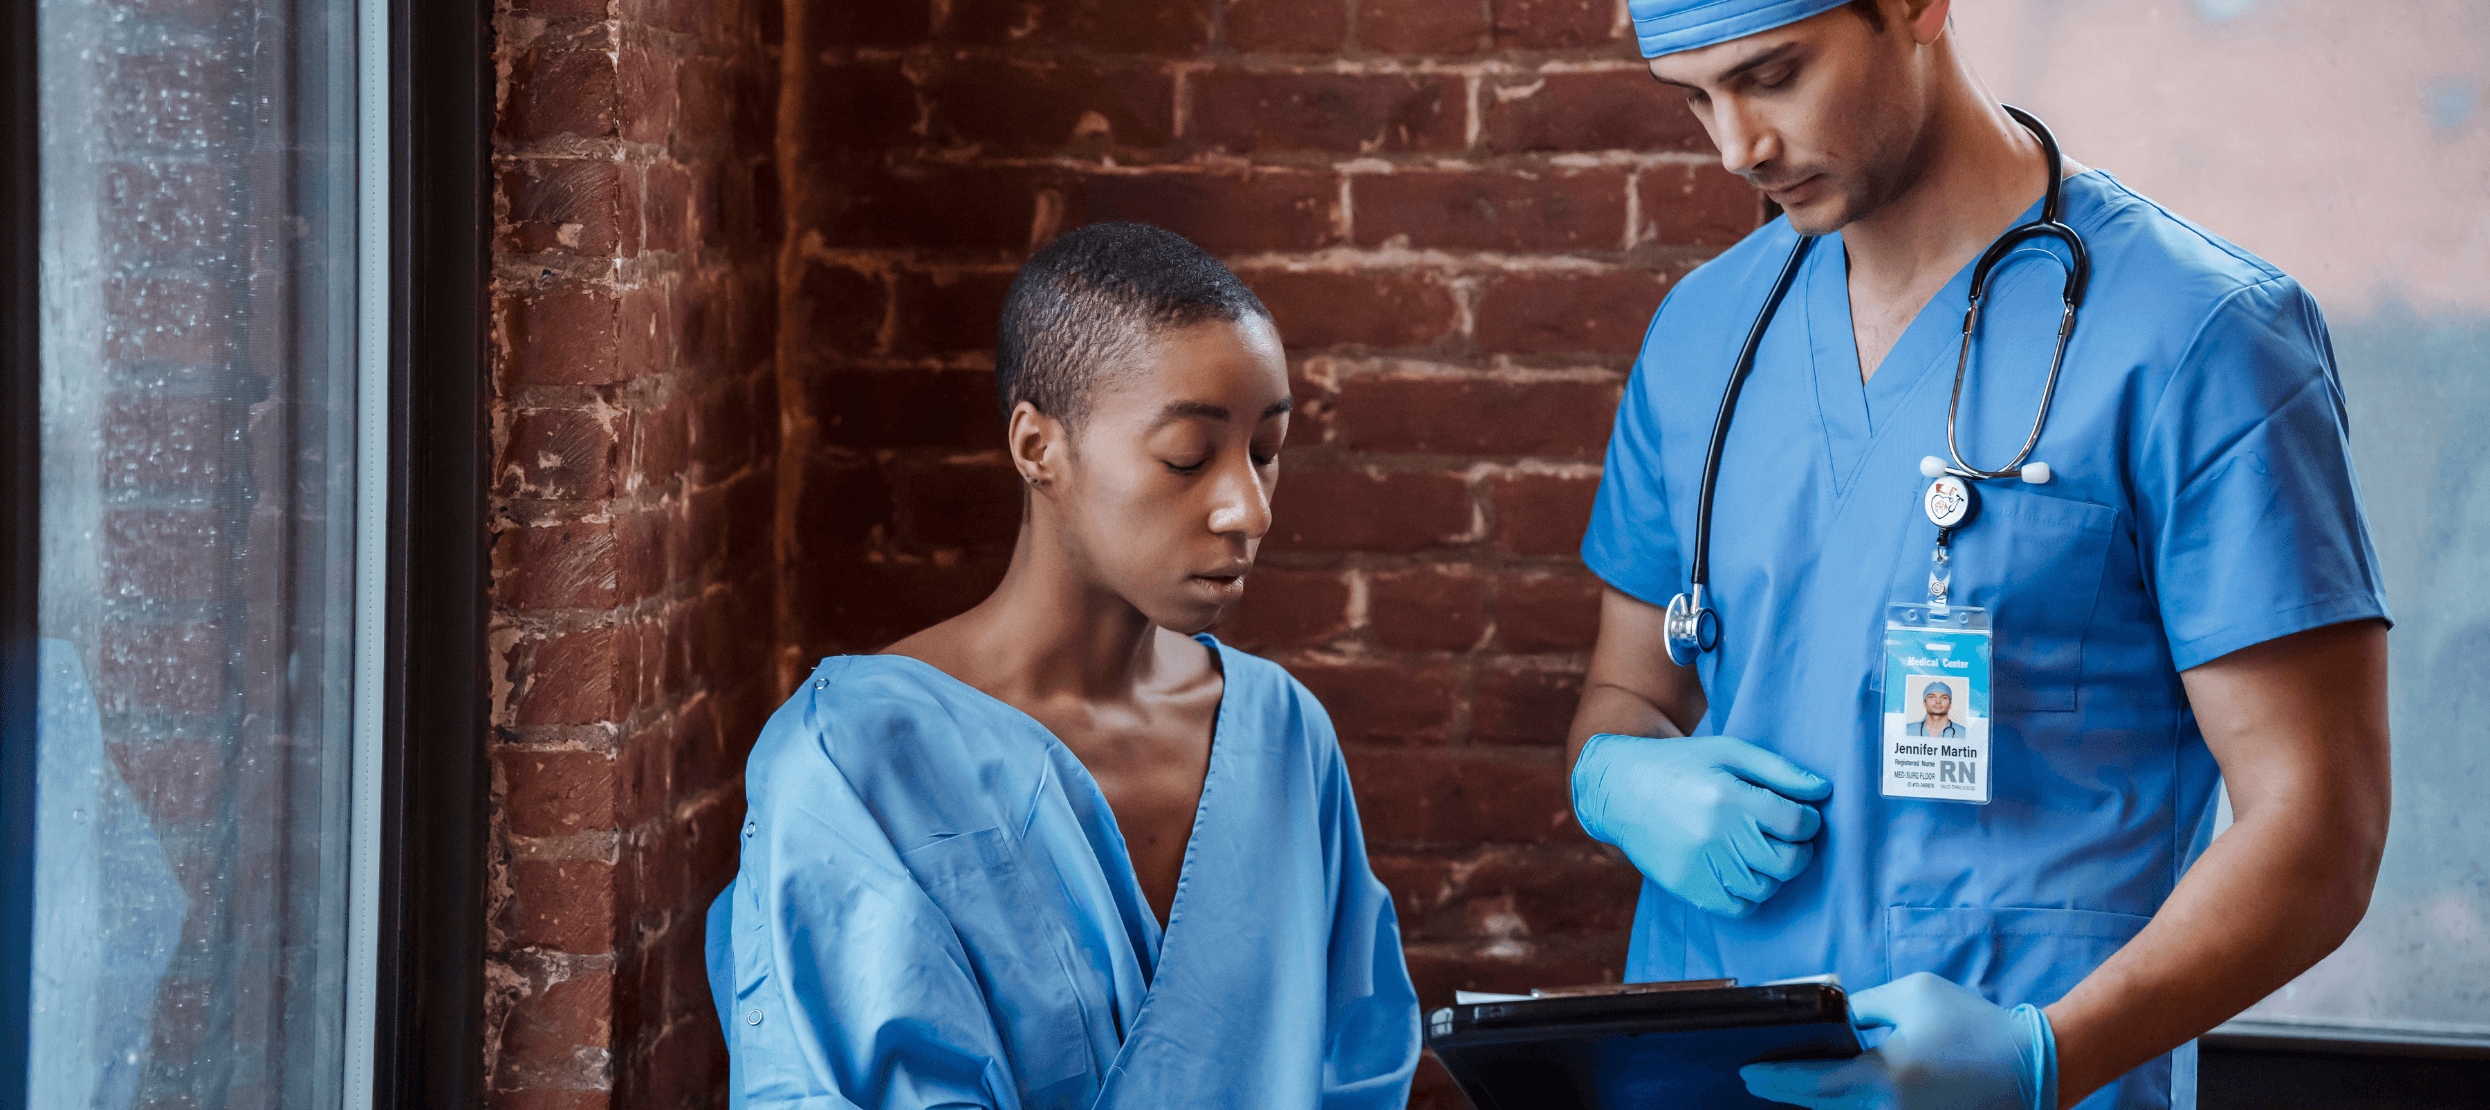 Microaggressions in Healthcare: Addressing Bias and Promoting Patient-Centered Care